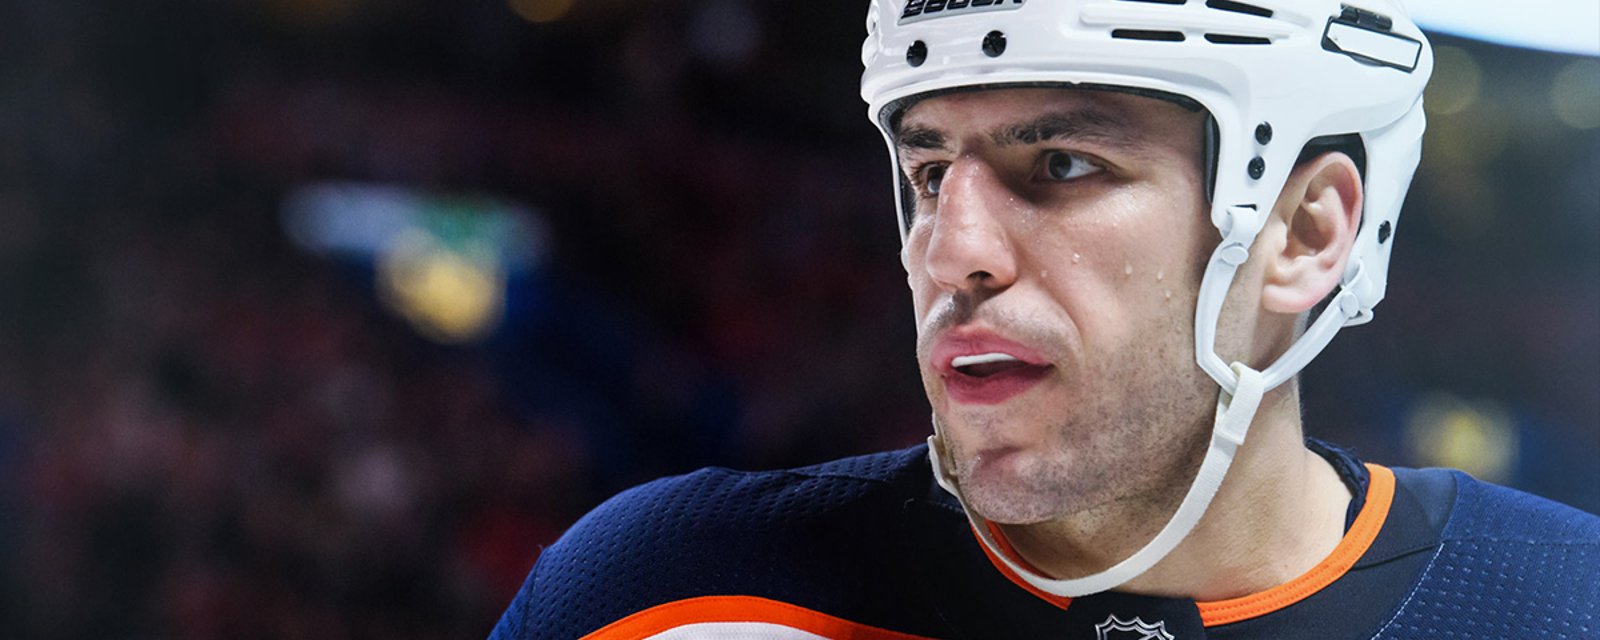 Milan Lucic calls out Canadian media for biased coverage.